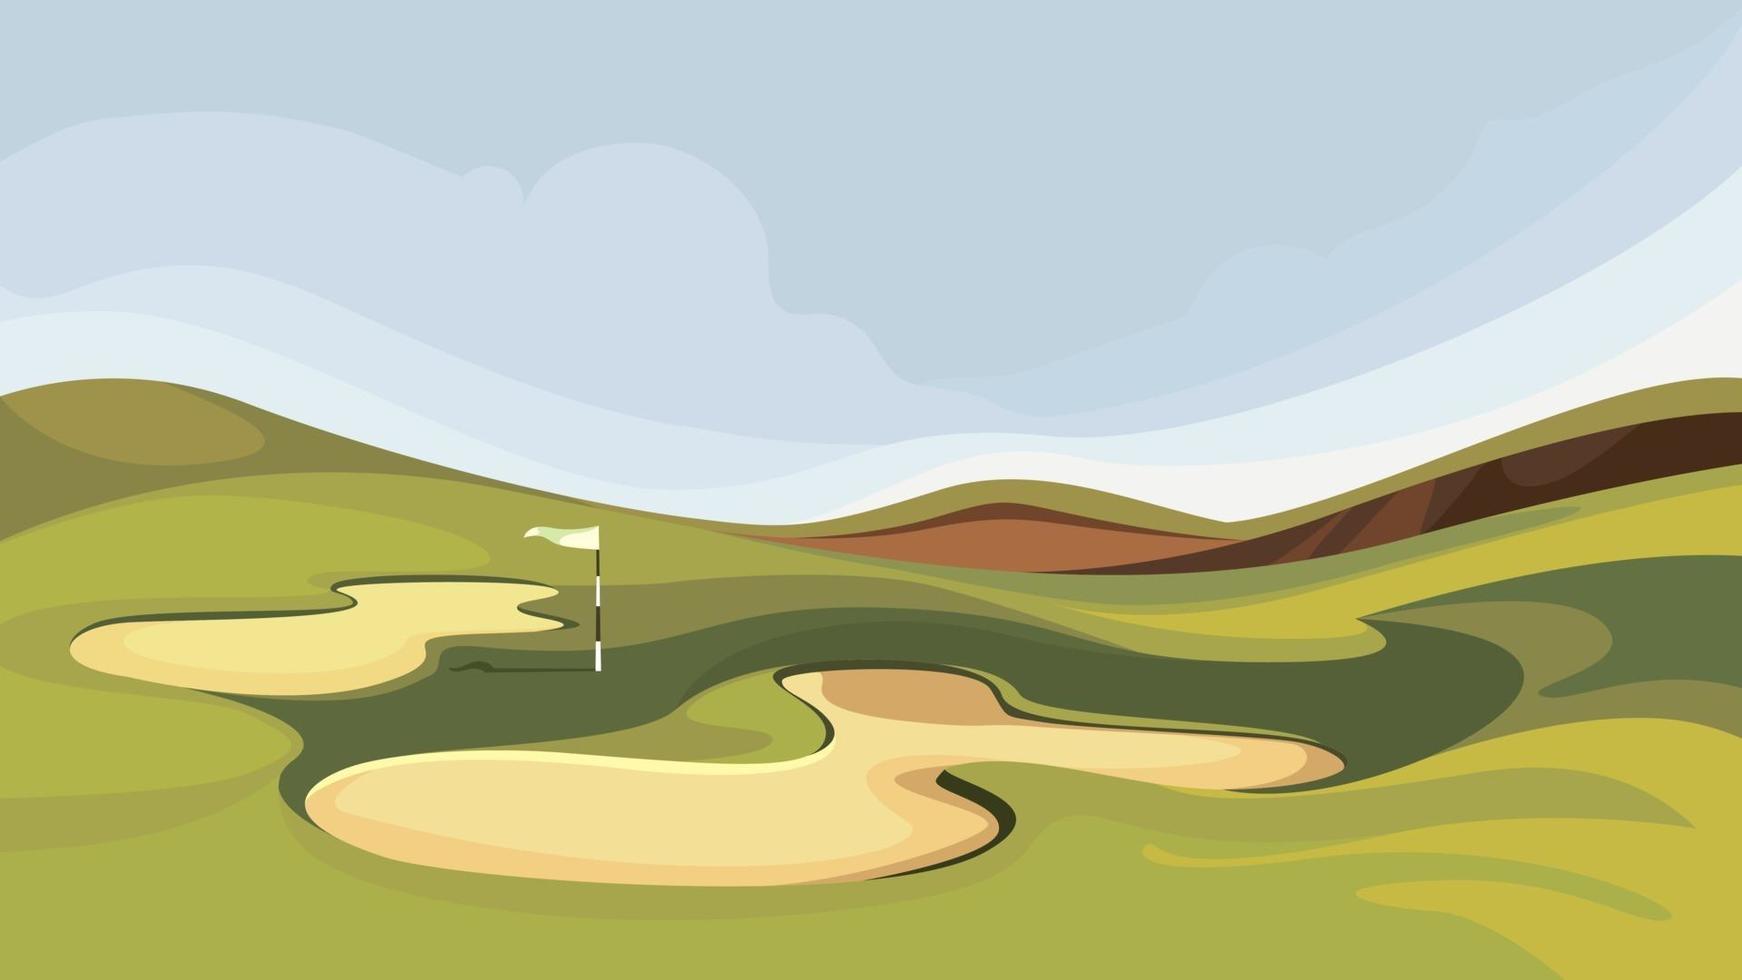 Golf course with sand traps. vector